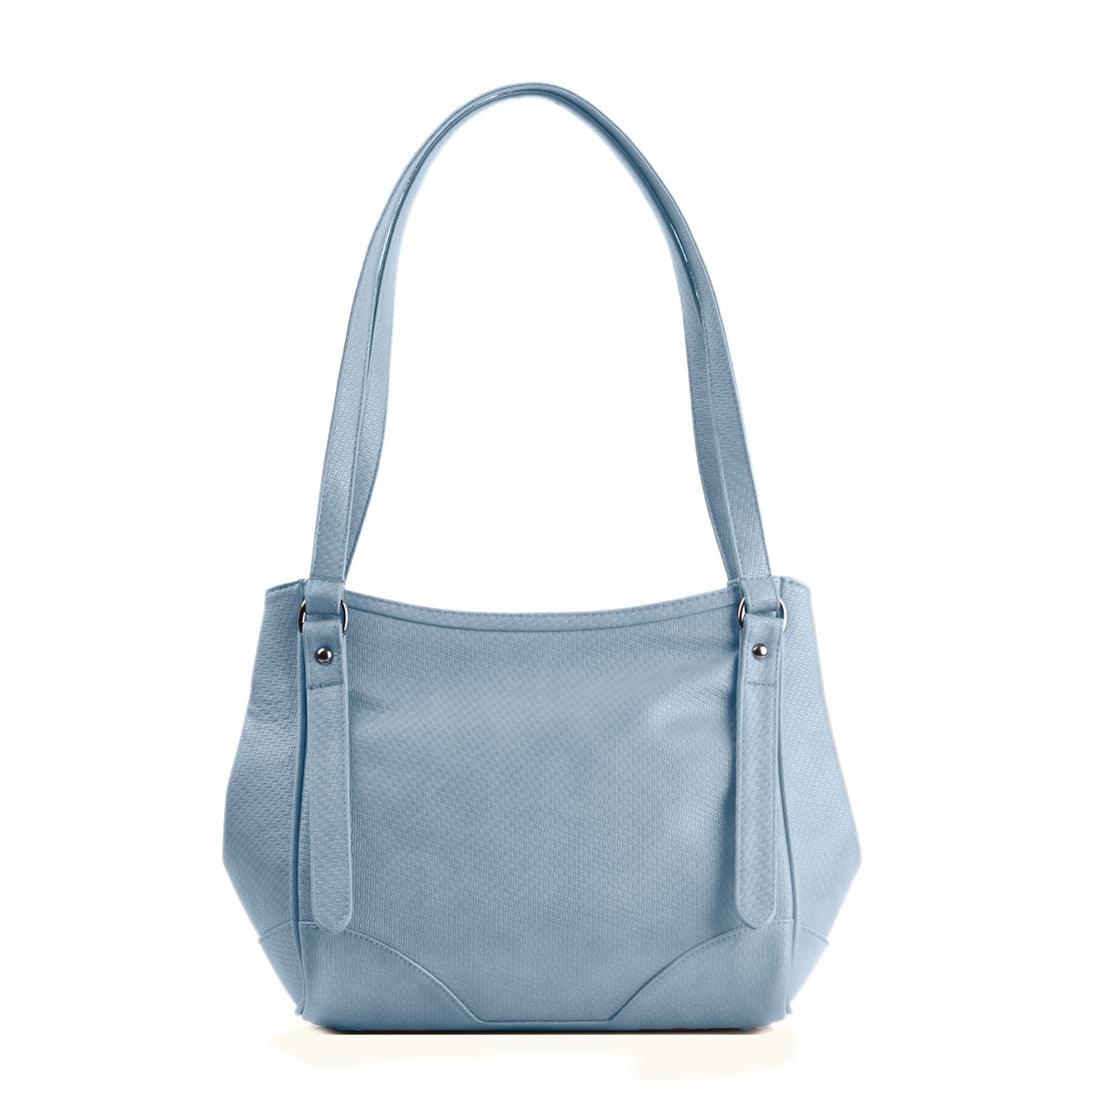 Blue Leather Tote Bag Flowers Pattern - CANVAEGYPT